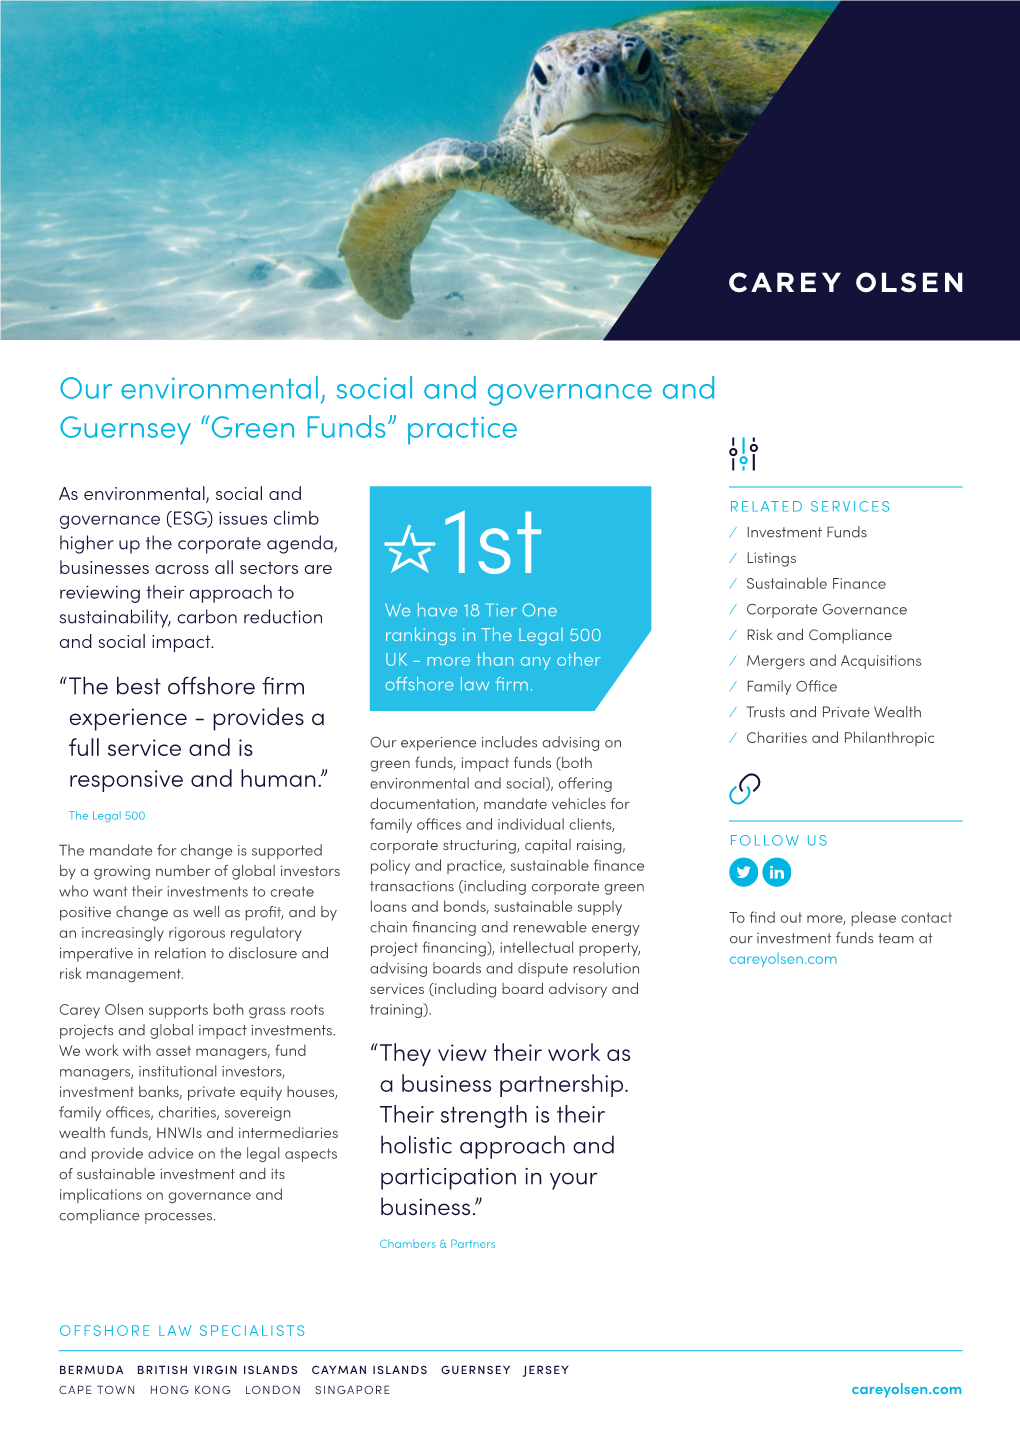 Our Environmental, Social and Governance and Guernsey “Green Funds” Practice